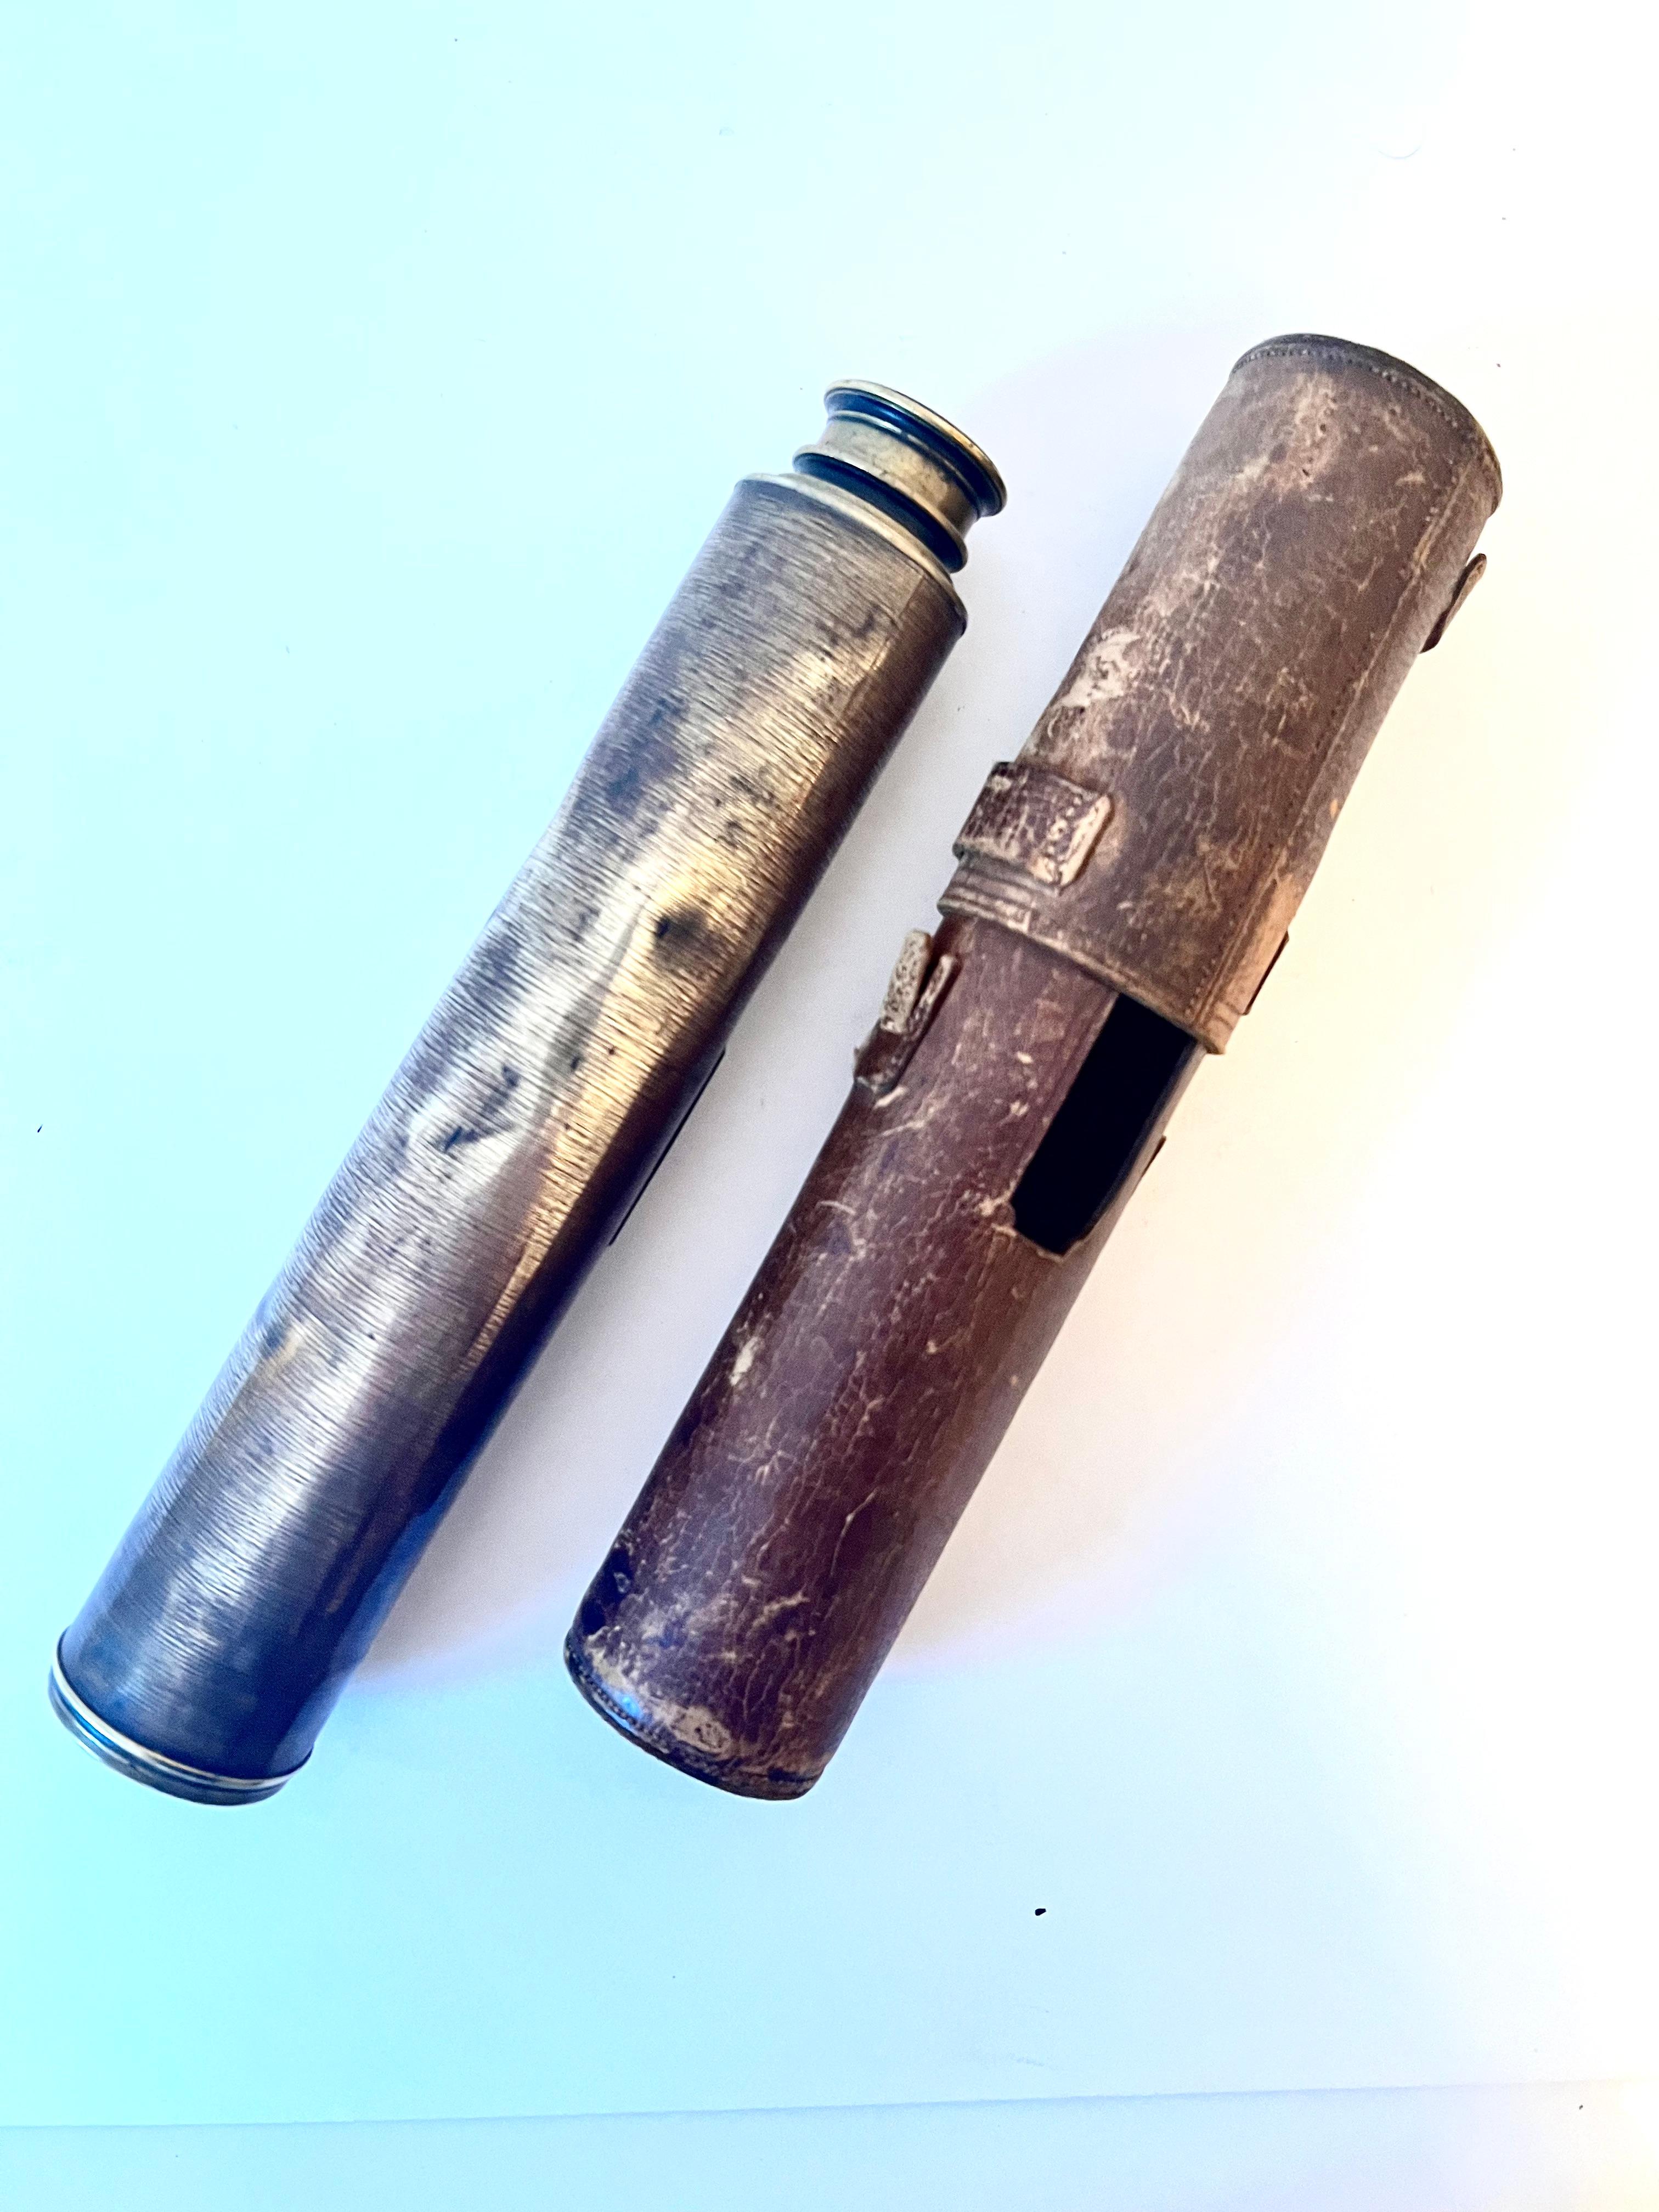 J H Steward Brass Telescope.  The Lord Bury Telescope comes with a leather case.  The brass and leather both. are very patinated.   Not only is the brass tarnished, but there are a few dings and some scratches, however it is still quite functional. 